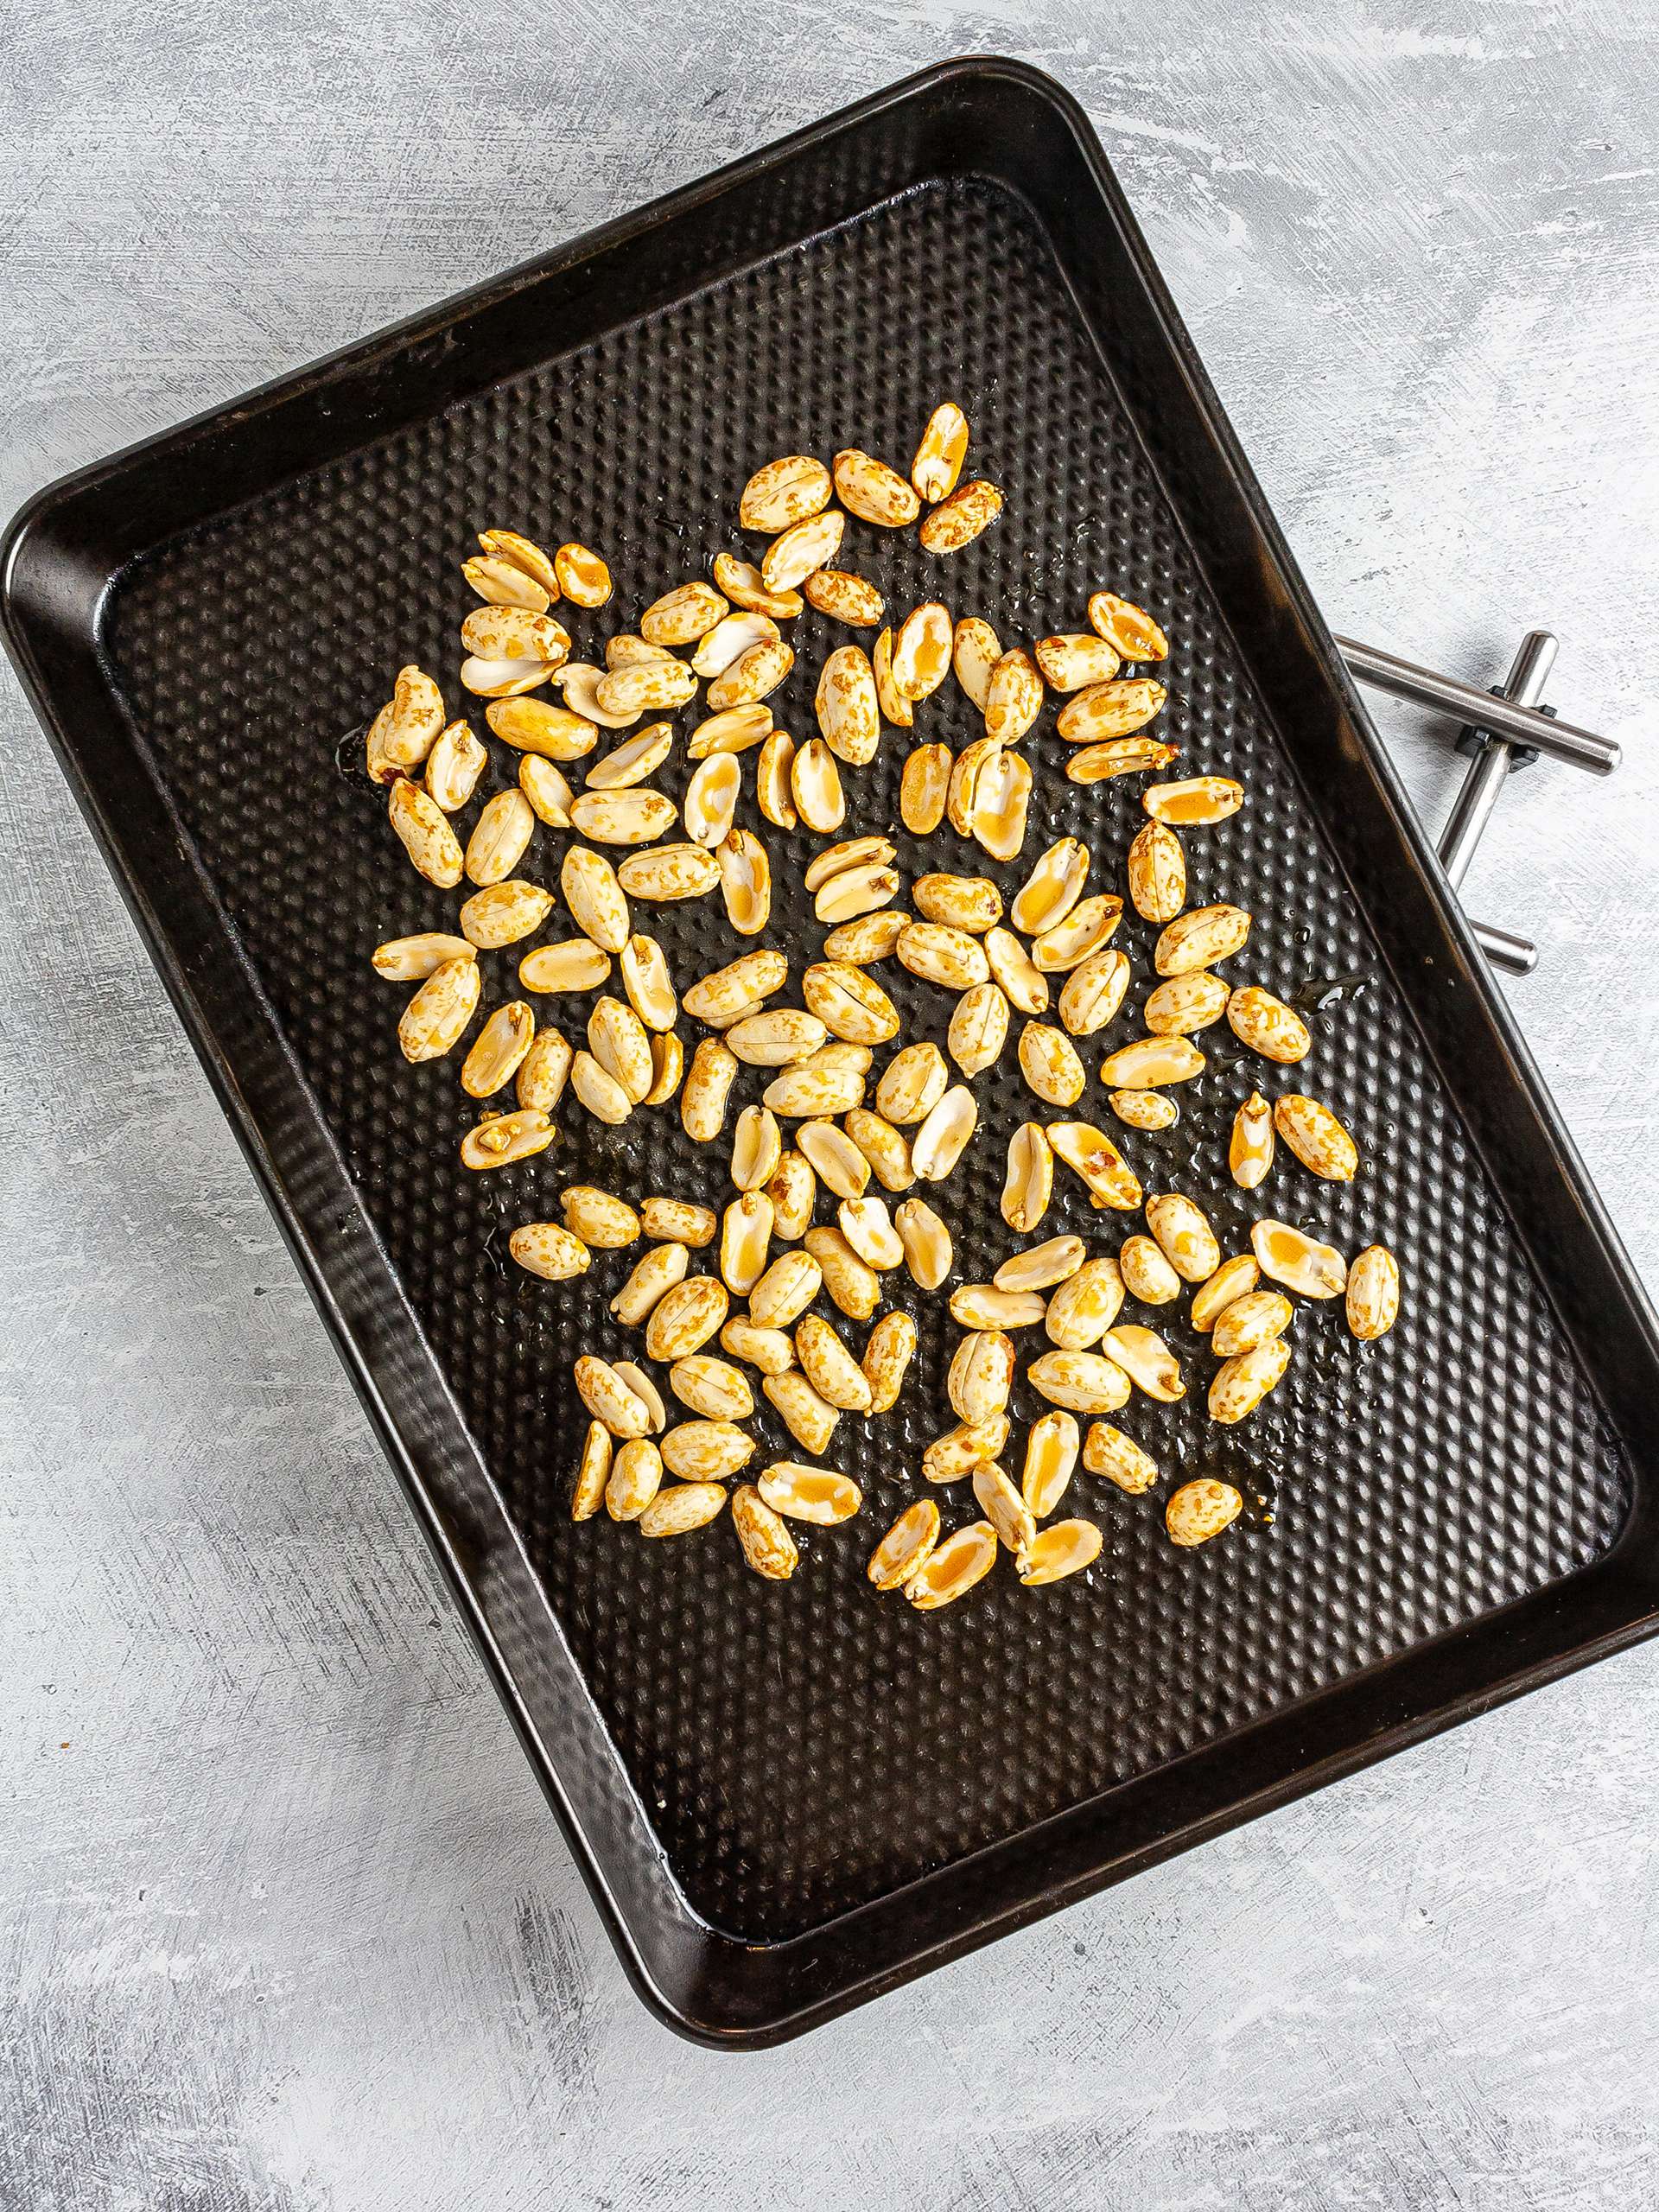 Roasted peanuts with maple